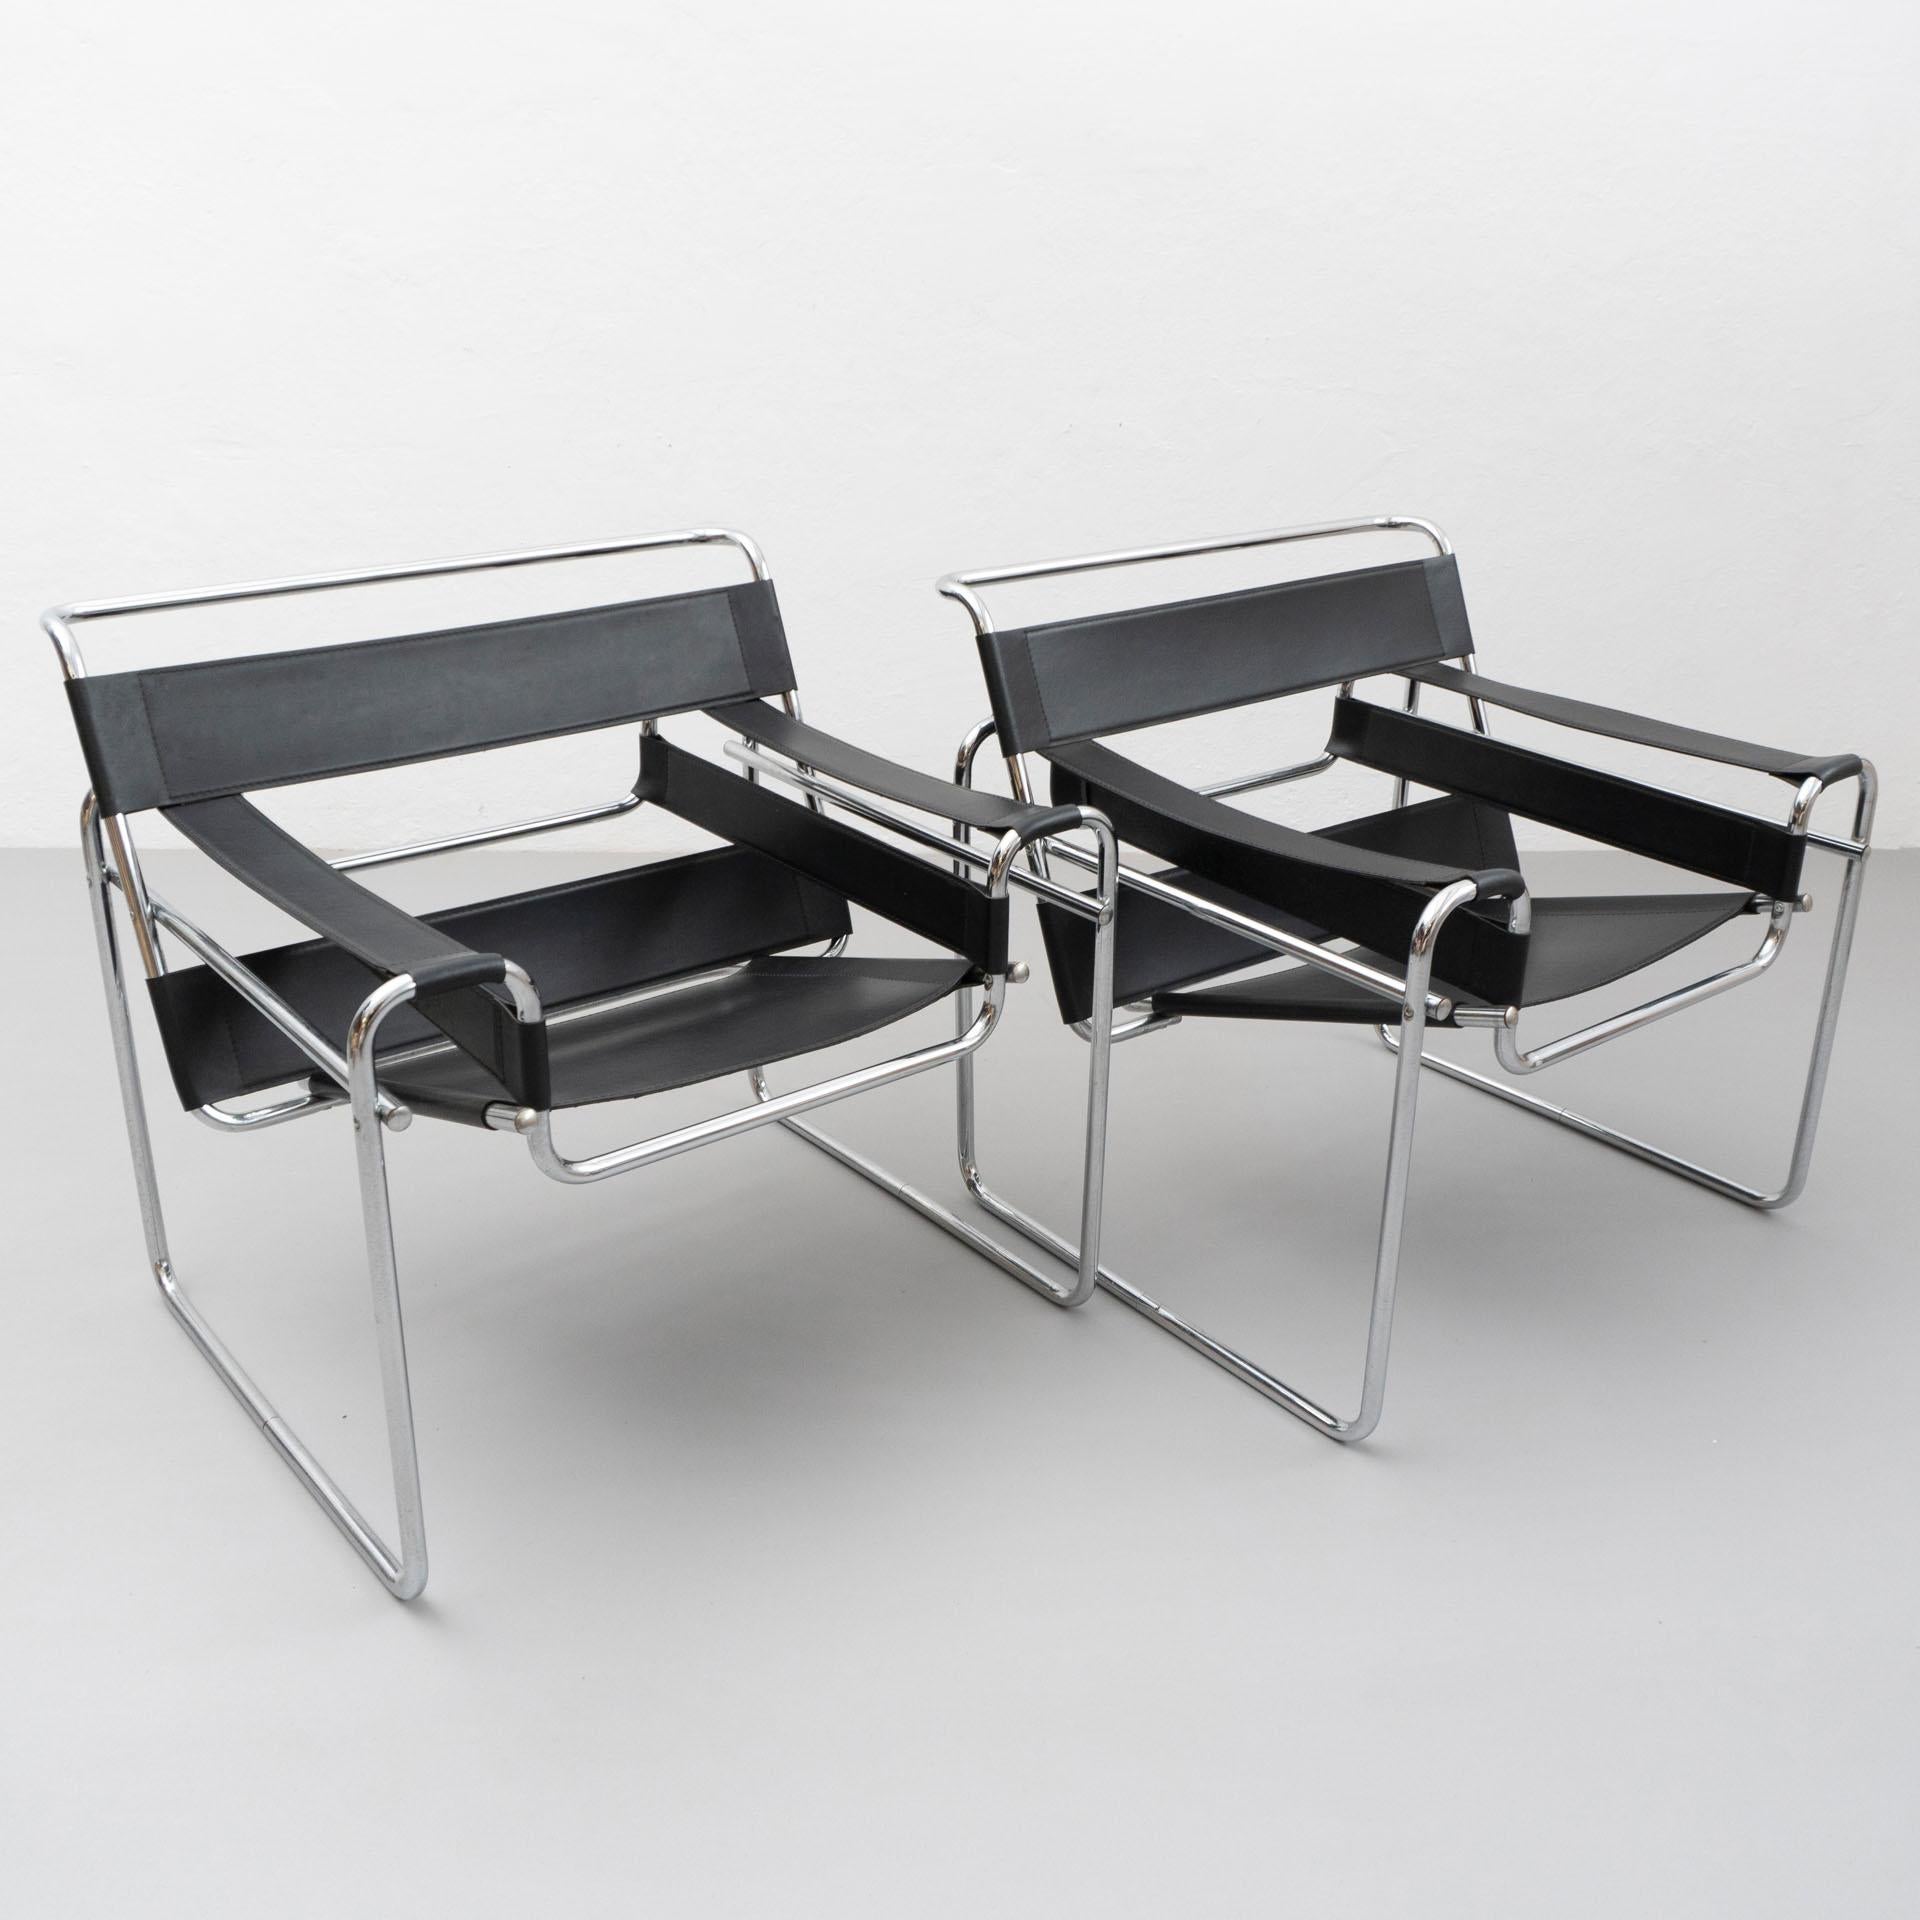 The Wassily chair, also known as the model B3 chair, was inspired by the frame of a bicycle and influenced by the constructivist theories of the De Stjil movement. Marcel Breuer was still an apprentice at the Bauhaus when he reduced the Classic club